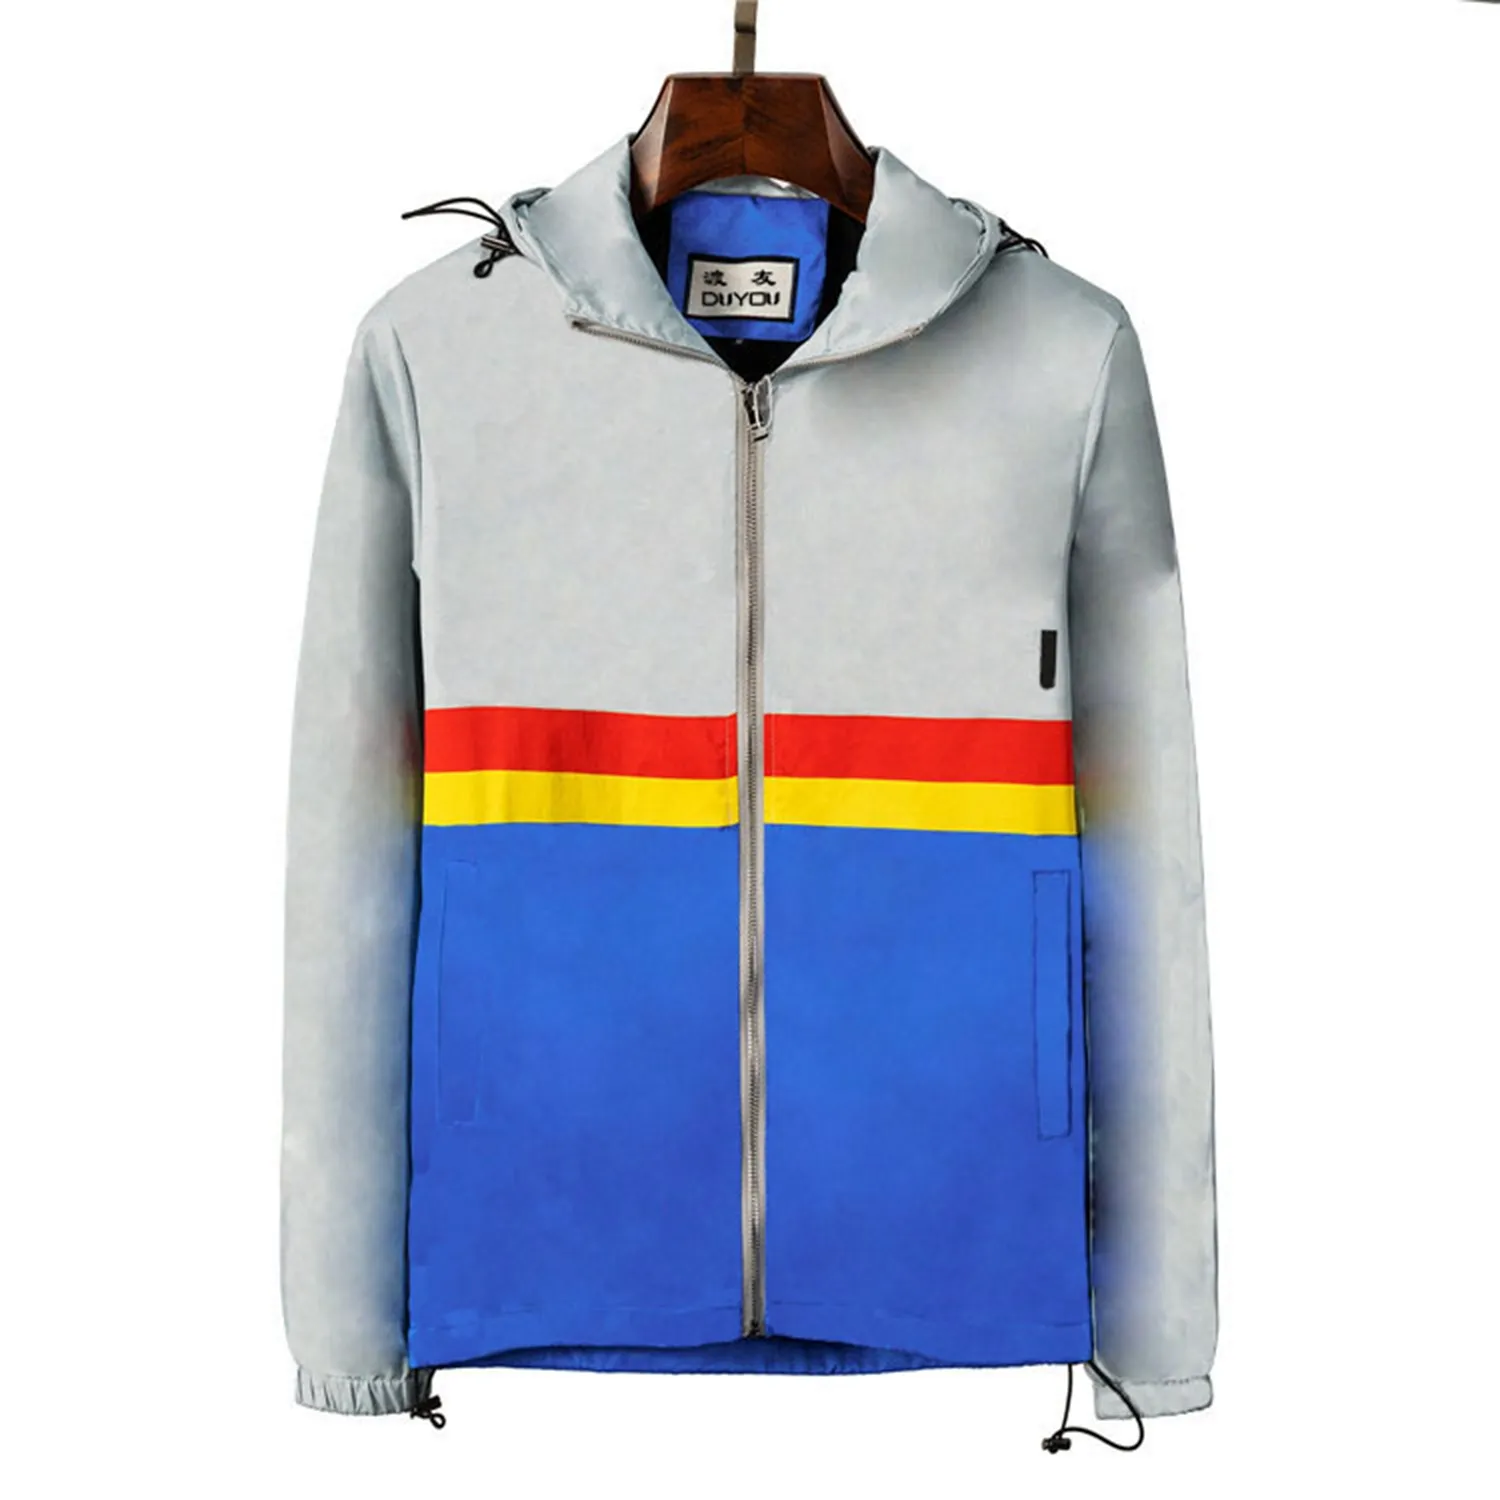 Mens Jackets thin Windbreaker Zip Hooded Stripe Outerwear Quality Hip Hop Designer Coats Armband Fashion Spring and Autumn Parkas Size M-3XL 87601